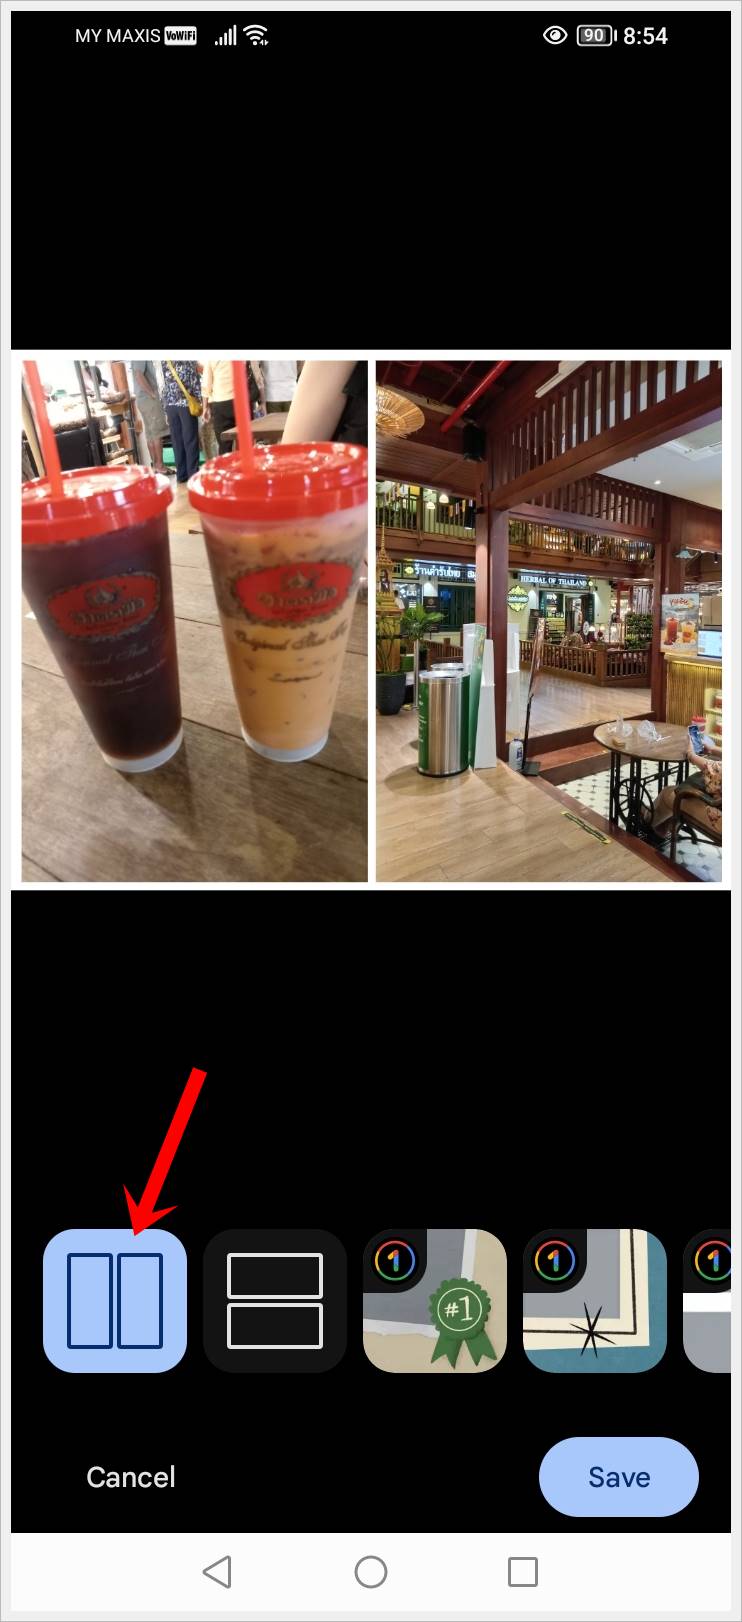 This image shows a screenshot of 2 different photos merged side-by-side by Google Photos on an Android phone. The 'Side-by-Side' layout option at the bottom has been highlighted.